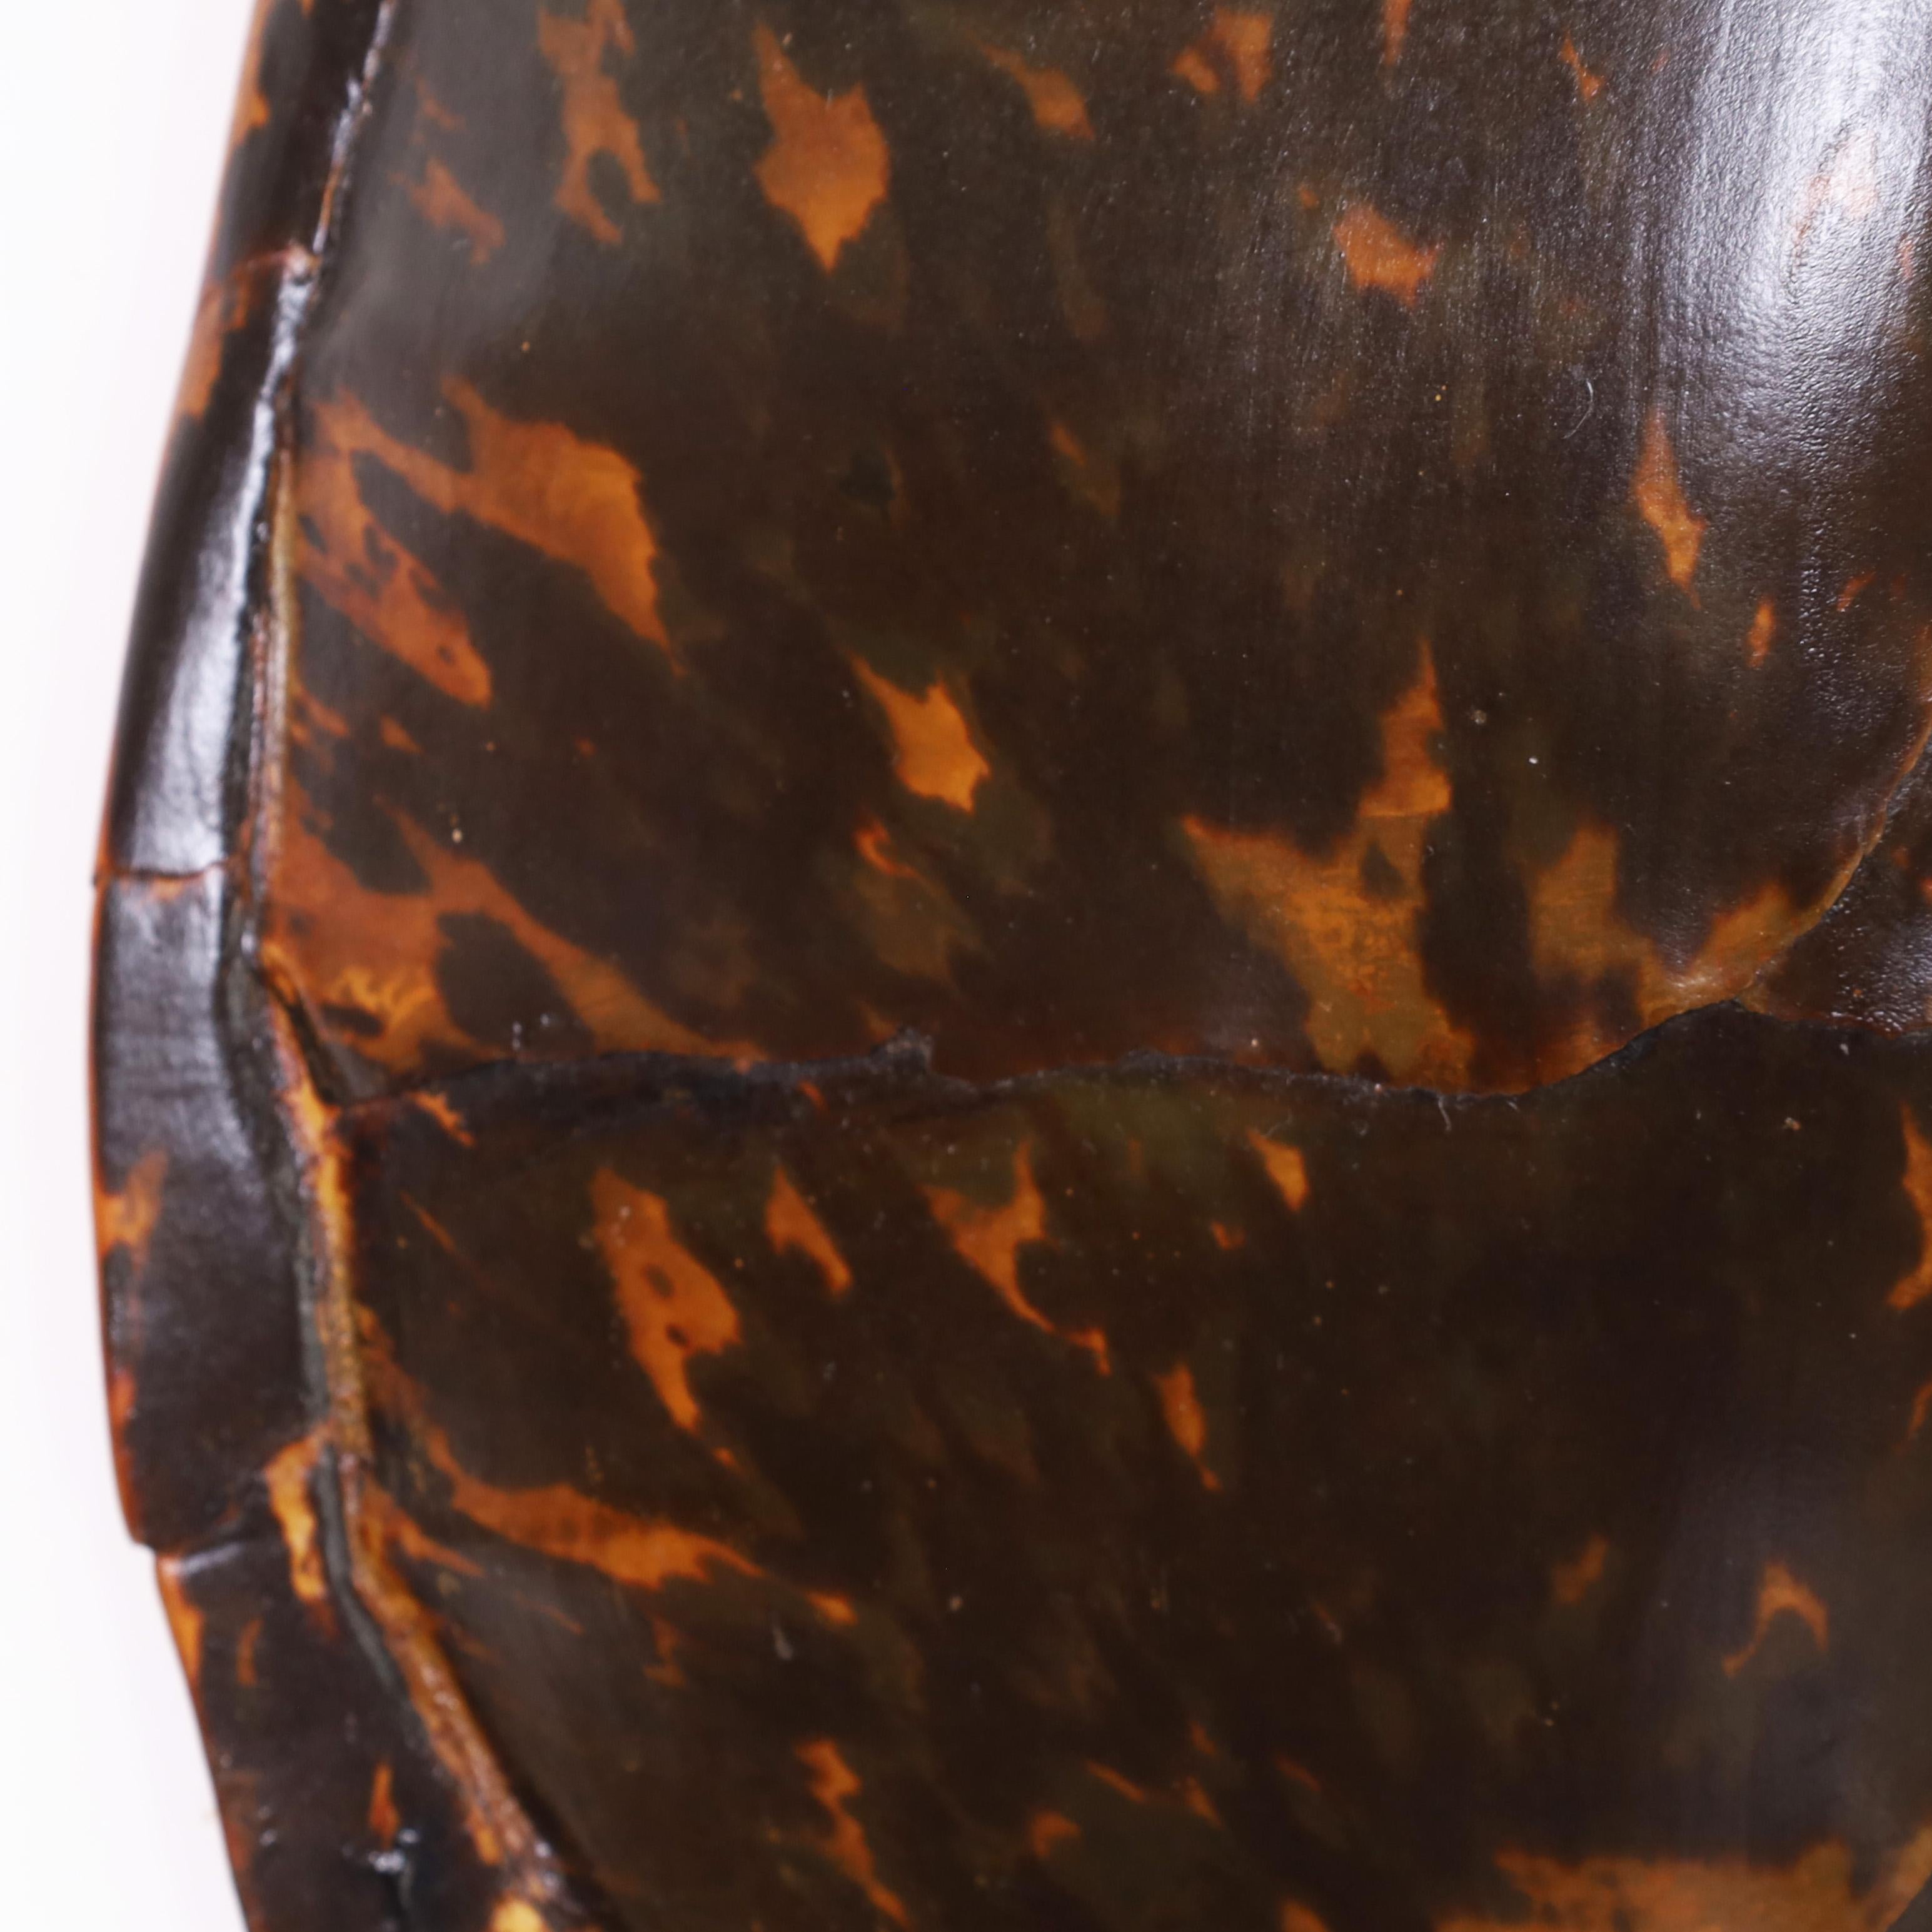 Caribbean Antique Hawksbill Turtle Shell or Carapace